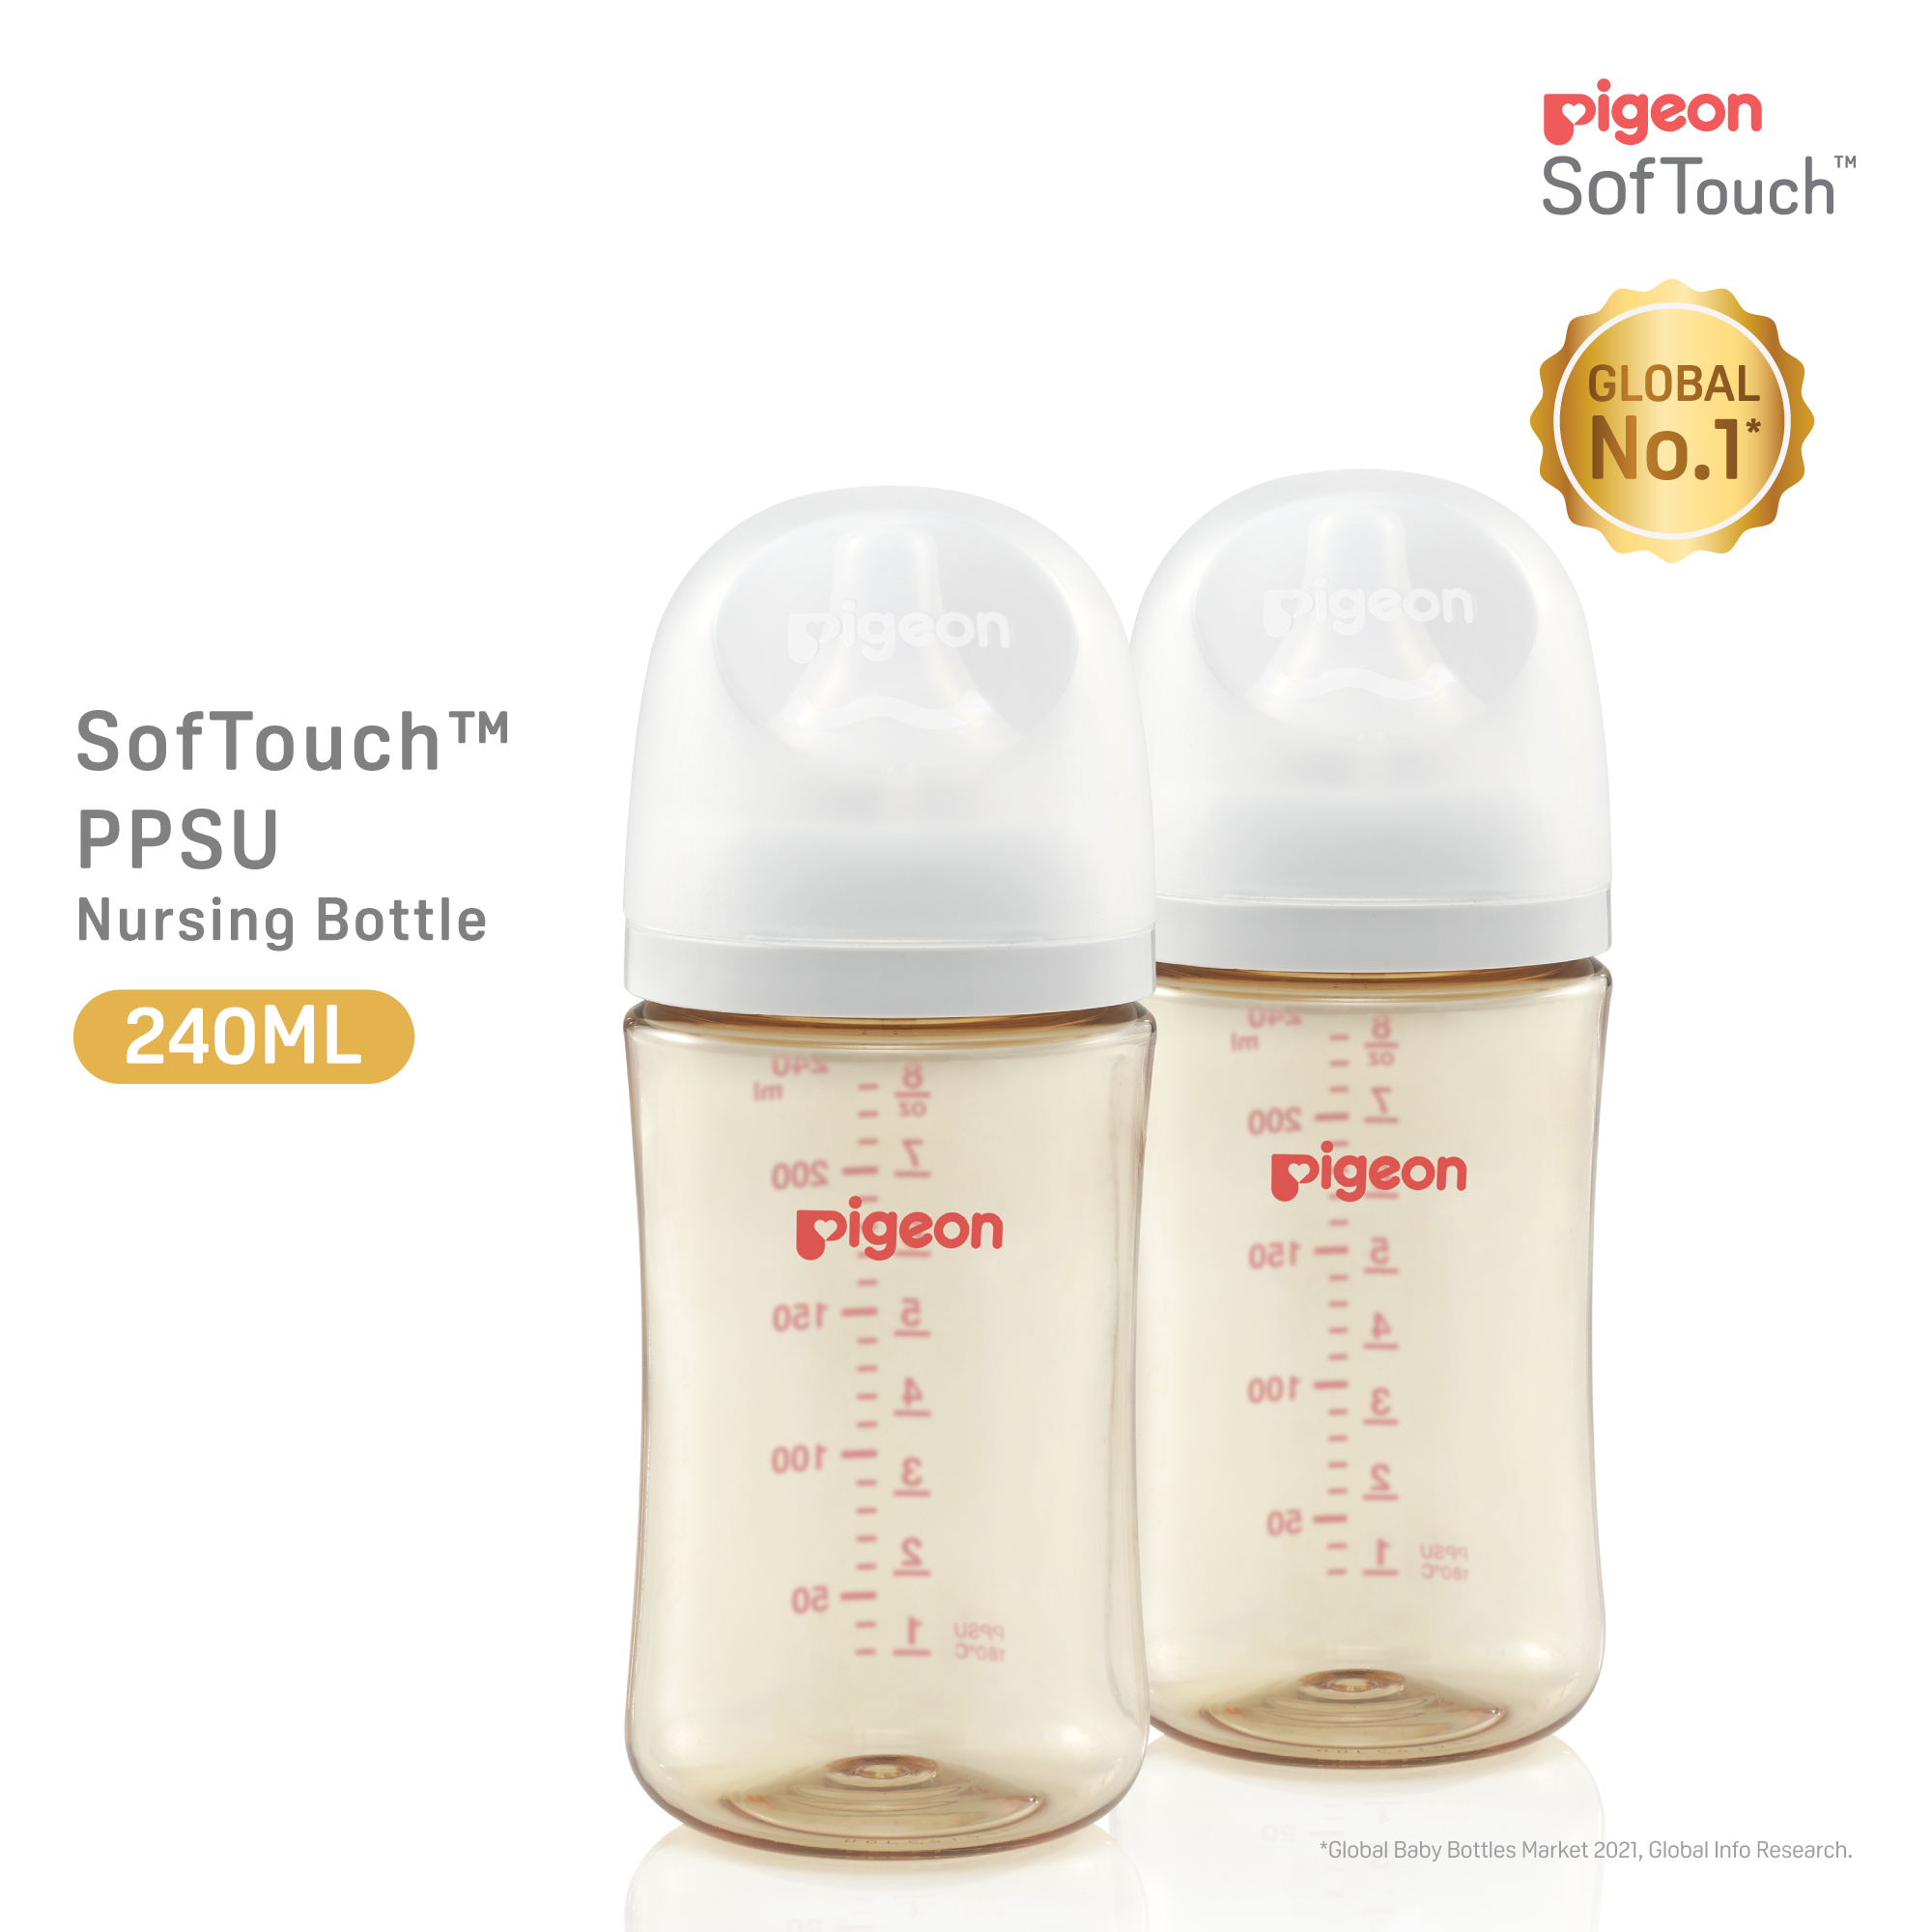 Pigeon SofTouch 3 Nursing Bottle Twin Pack PPSU 240ml (PG-79441)